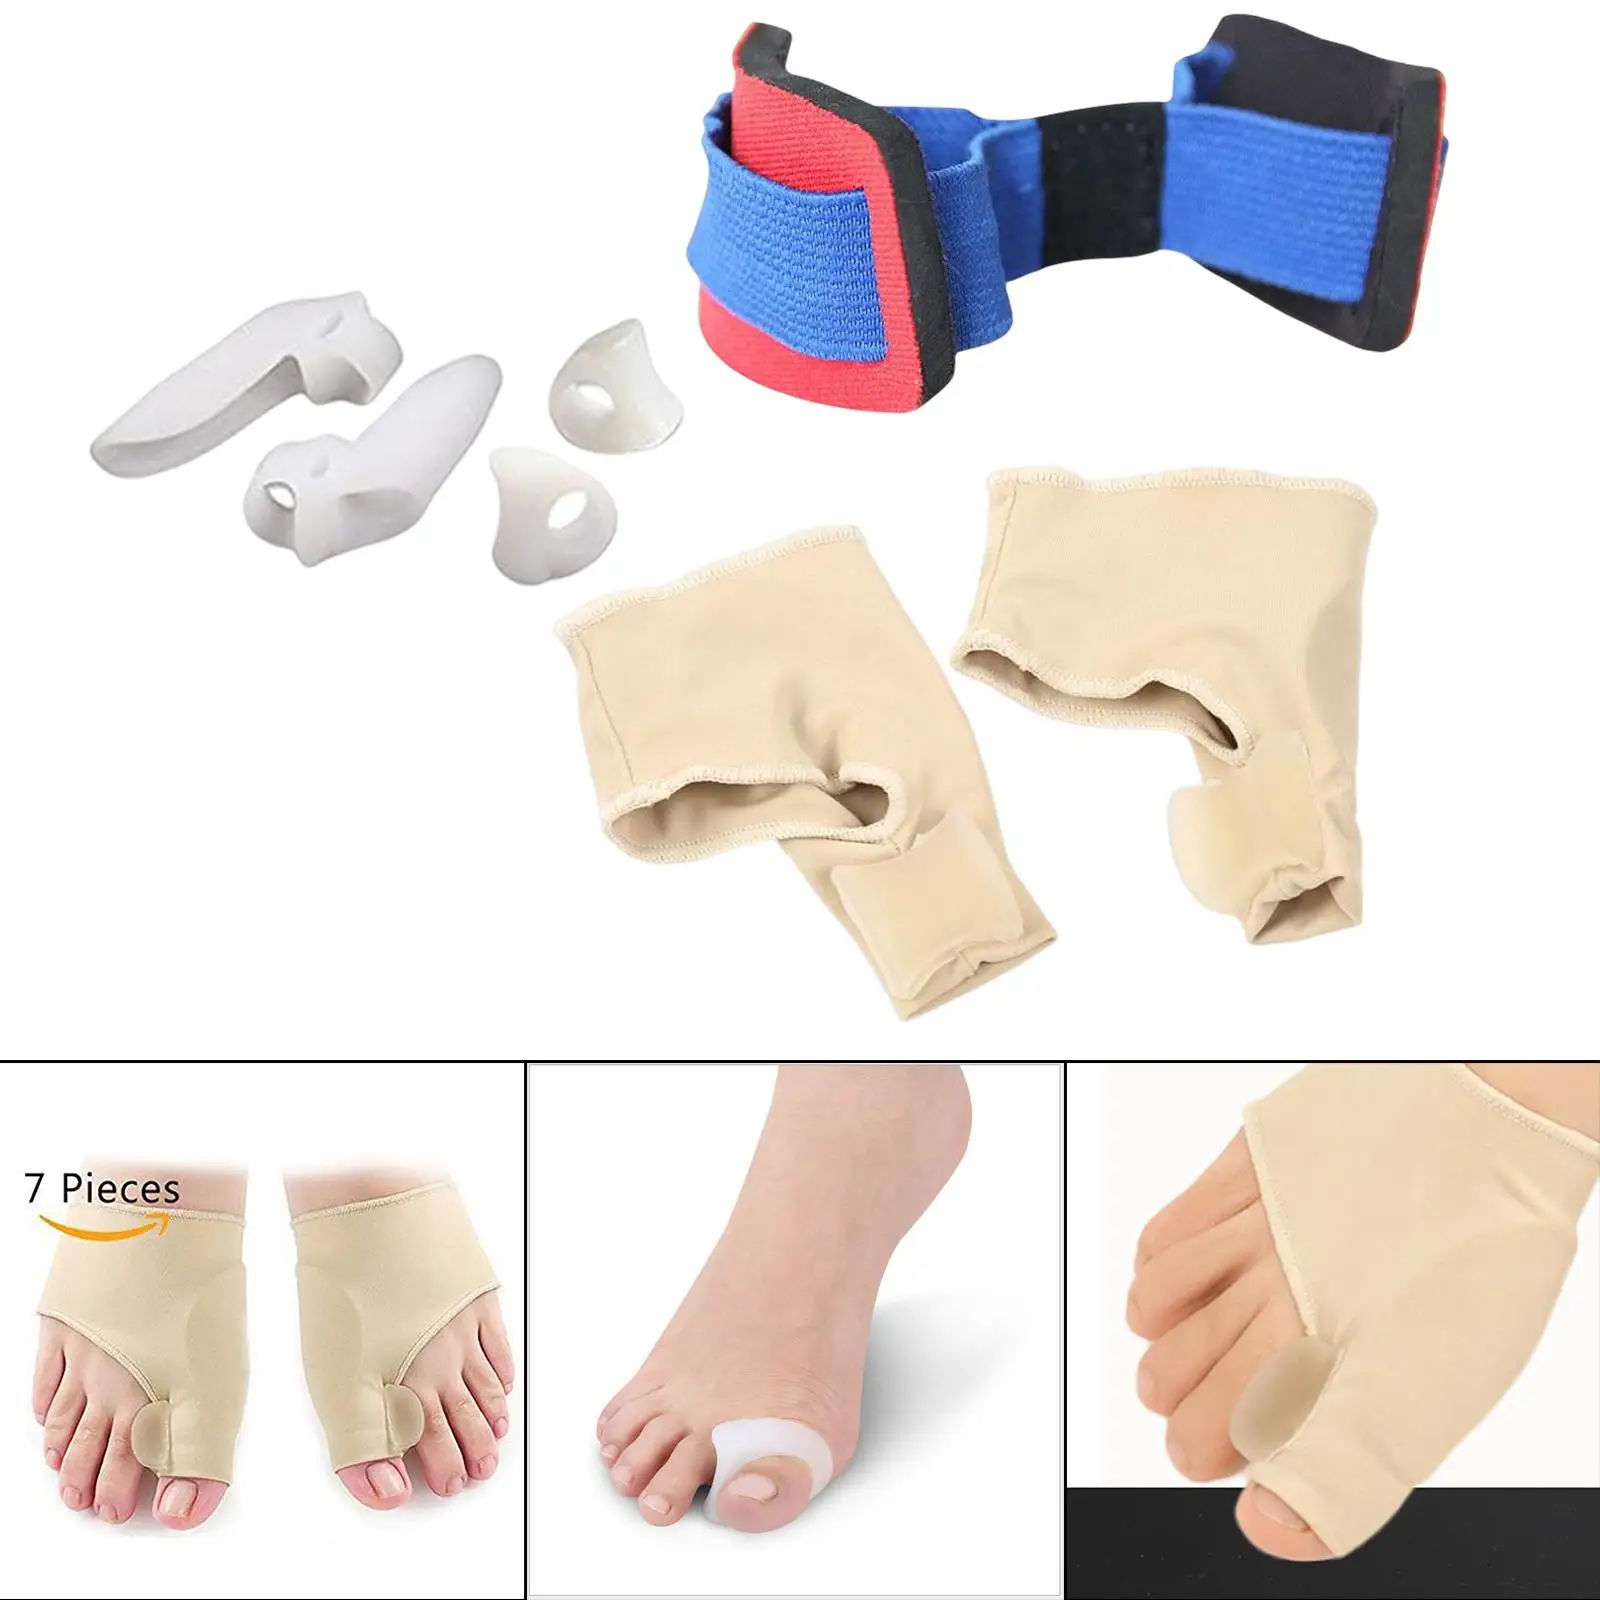 Bunion Corrector Set Men Women Protective Hallux Valgus Correction Day Night Support Protector Sleeves Bunion Pads Sleeves Brace